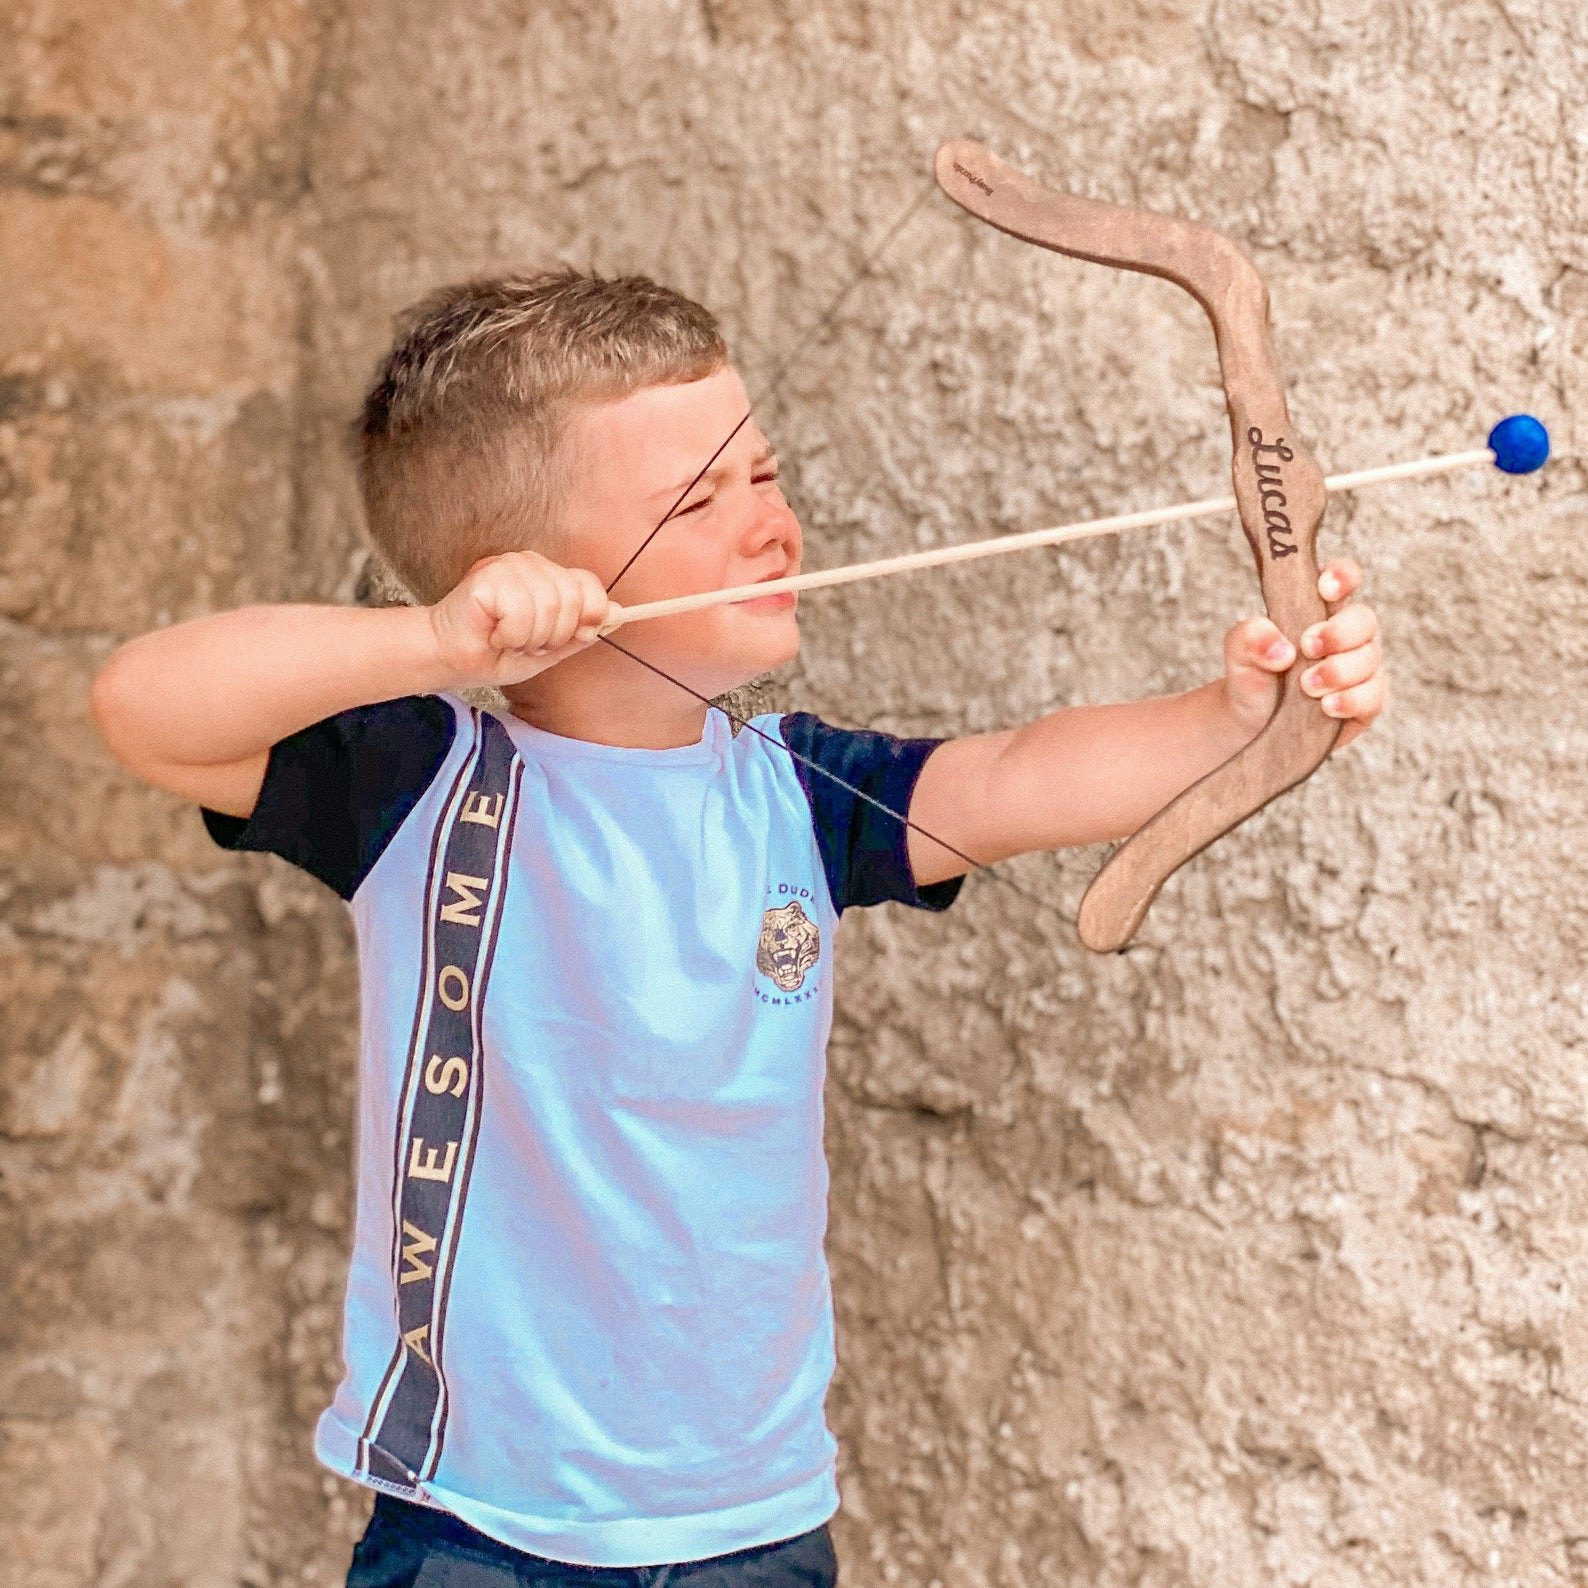 High Quality Archery Bow and Arrow Toy Play Set For Kids Age 3+ 